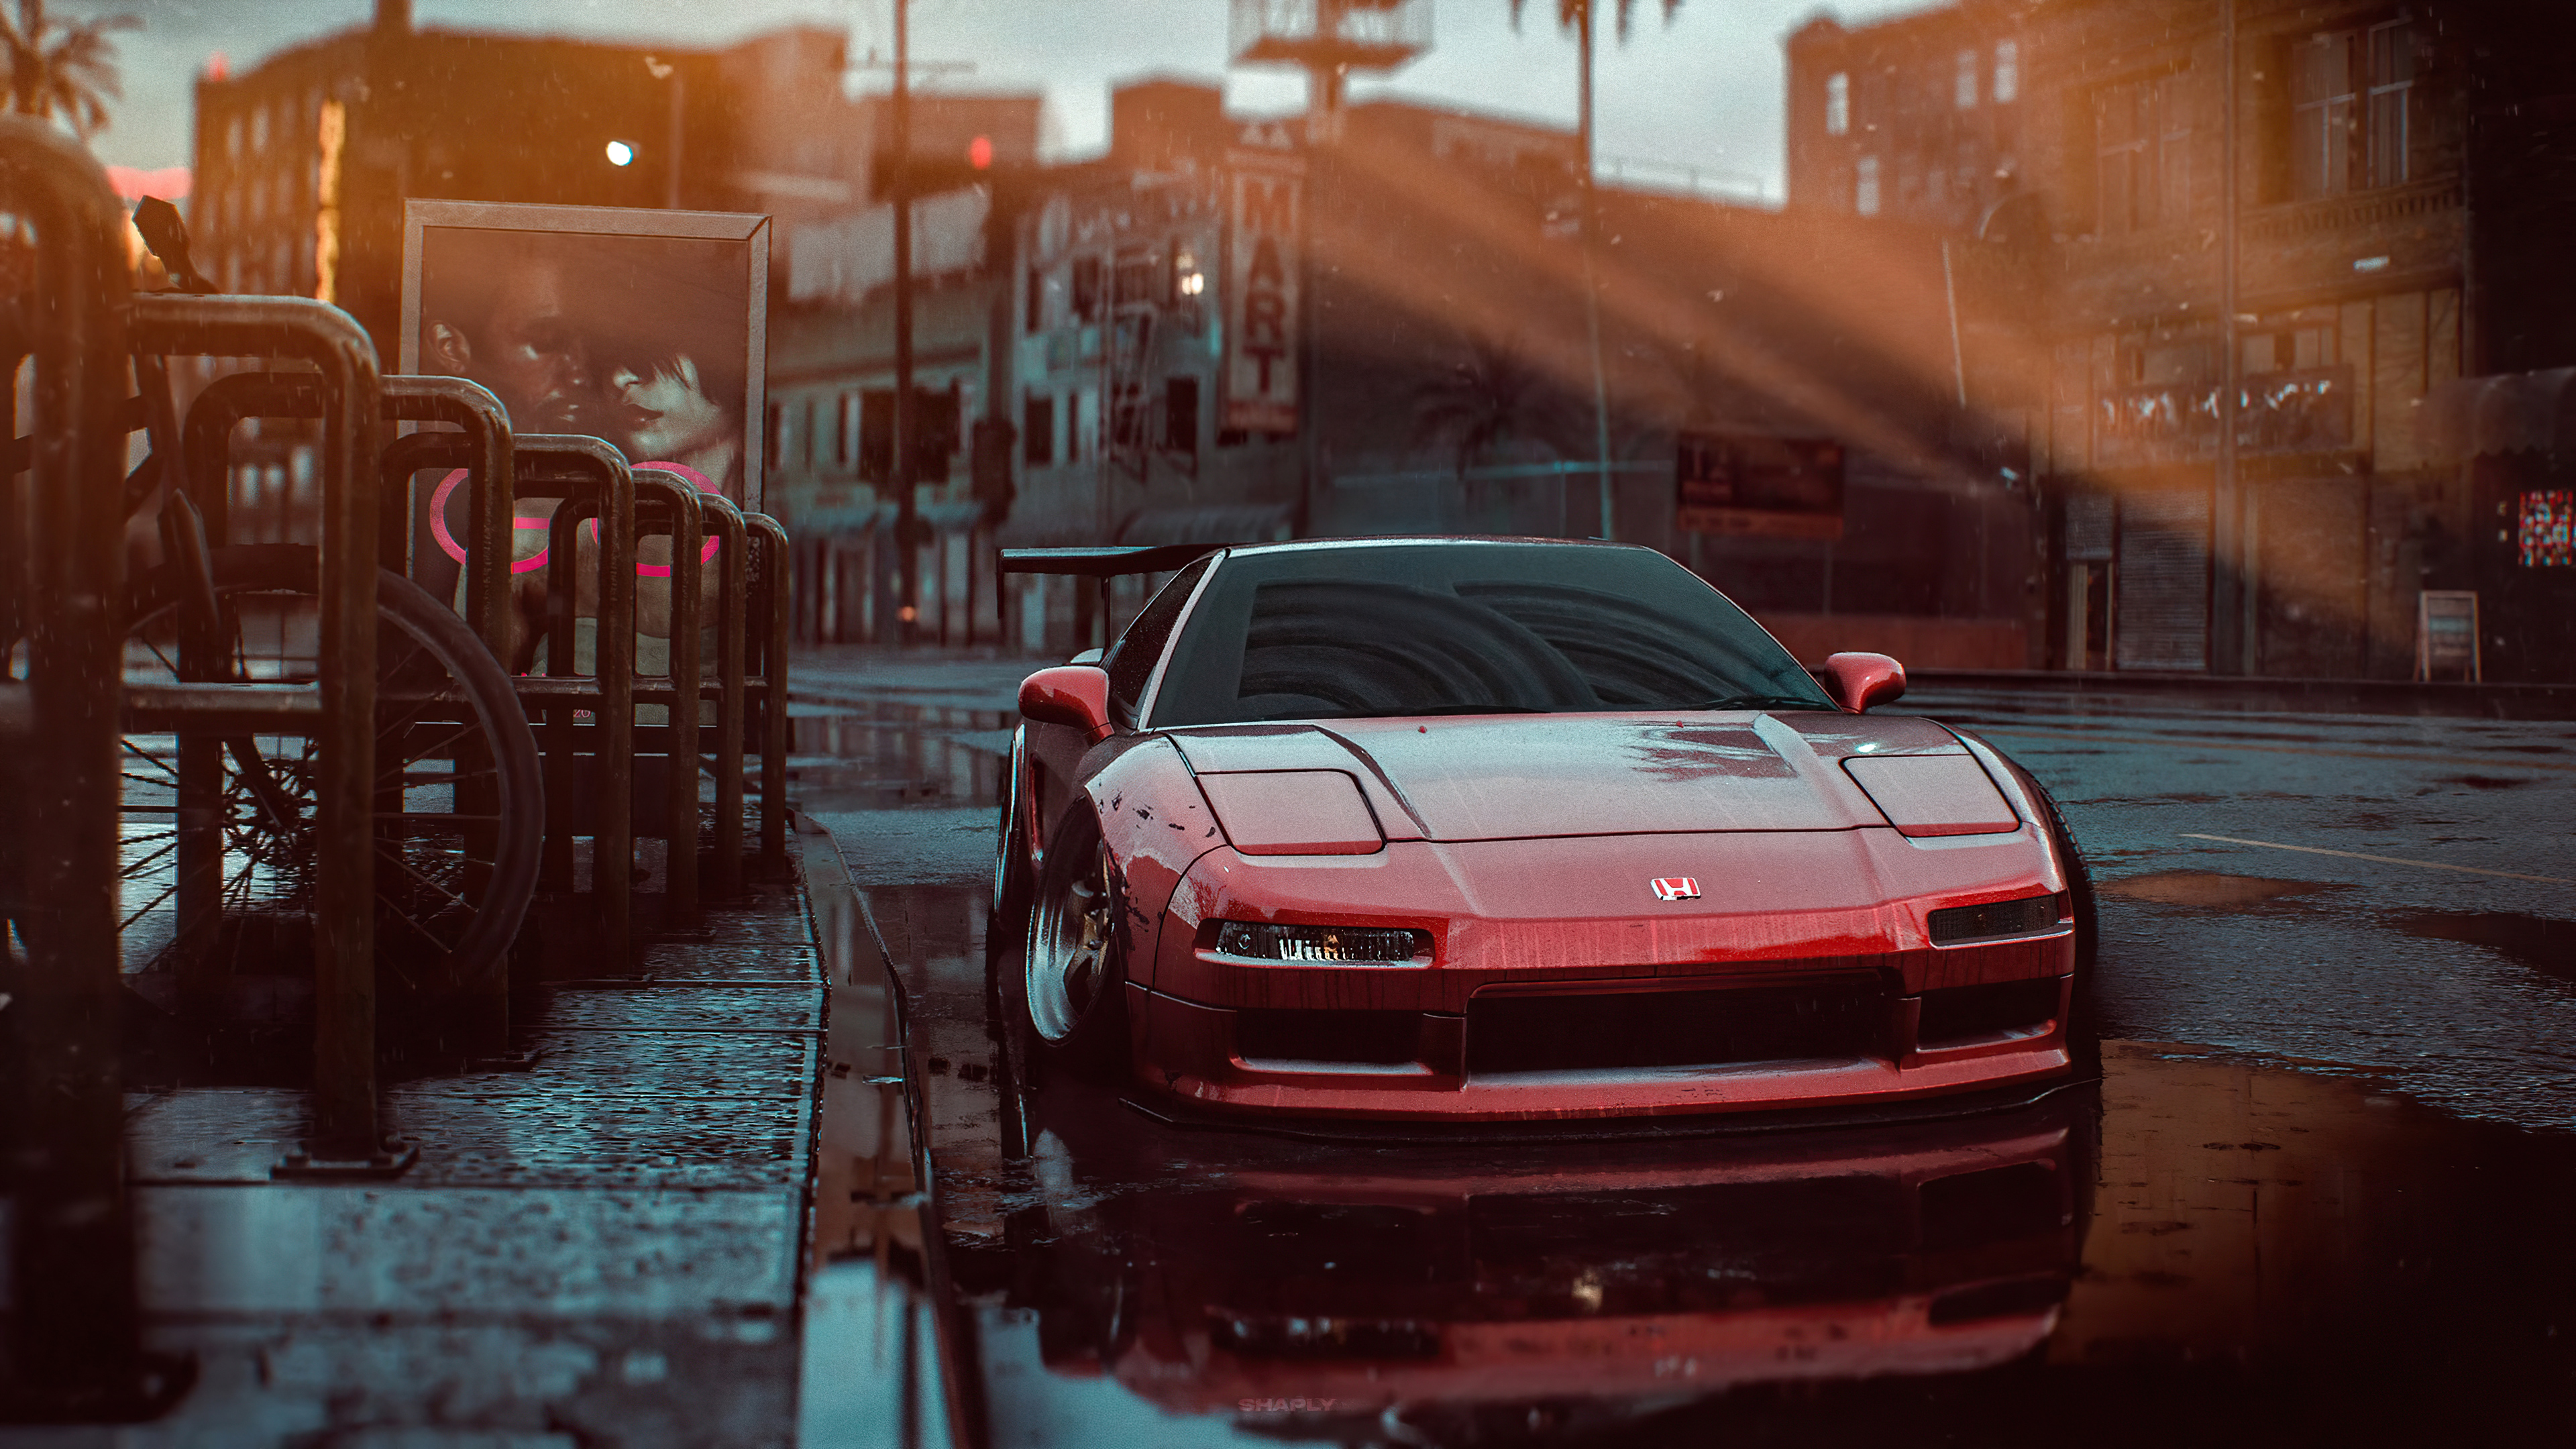 Honda nsx need for speed k hd games k wallpapers images backgrounds photos and pictures